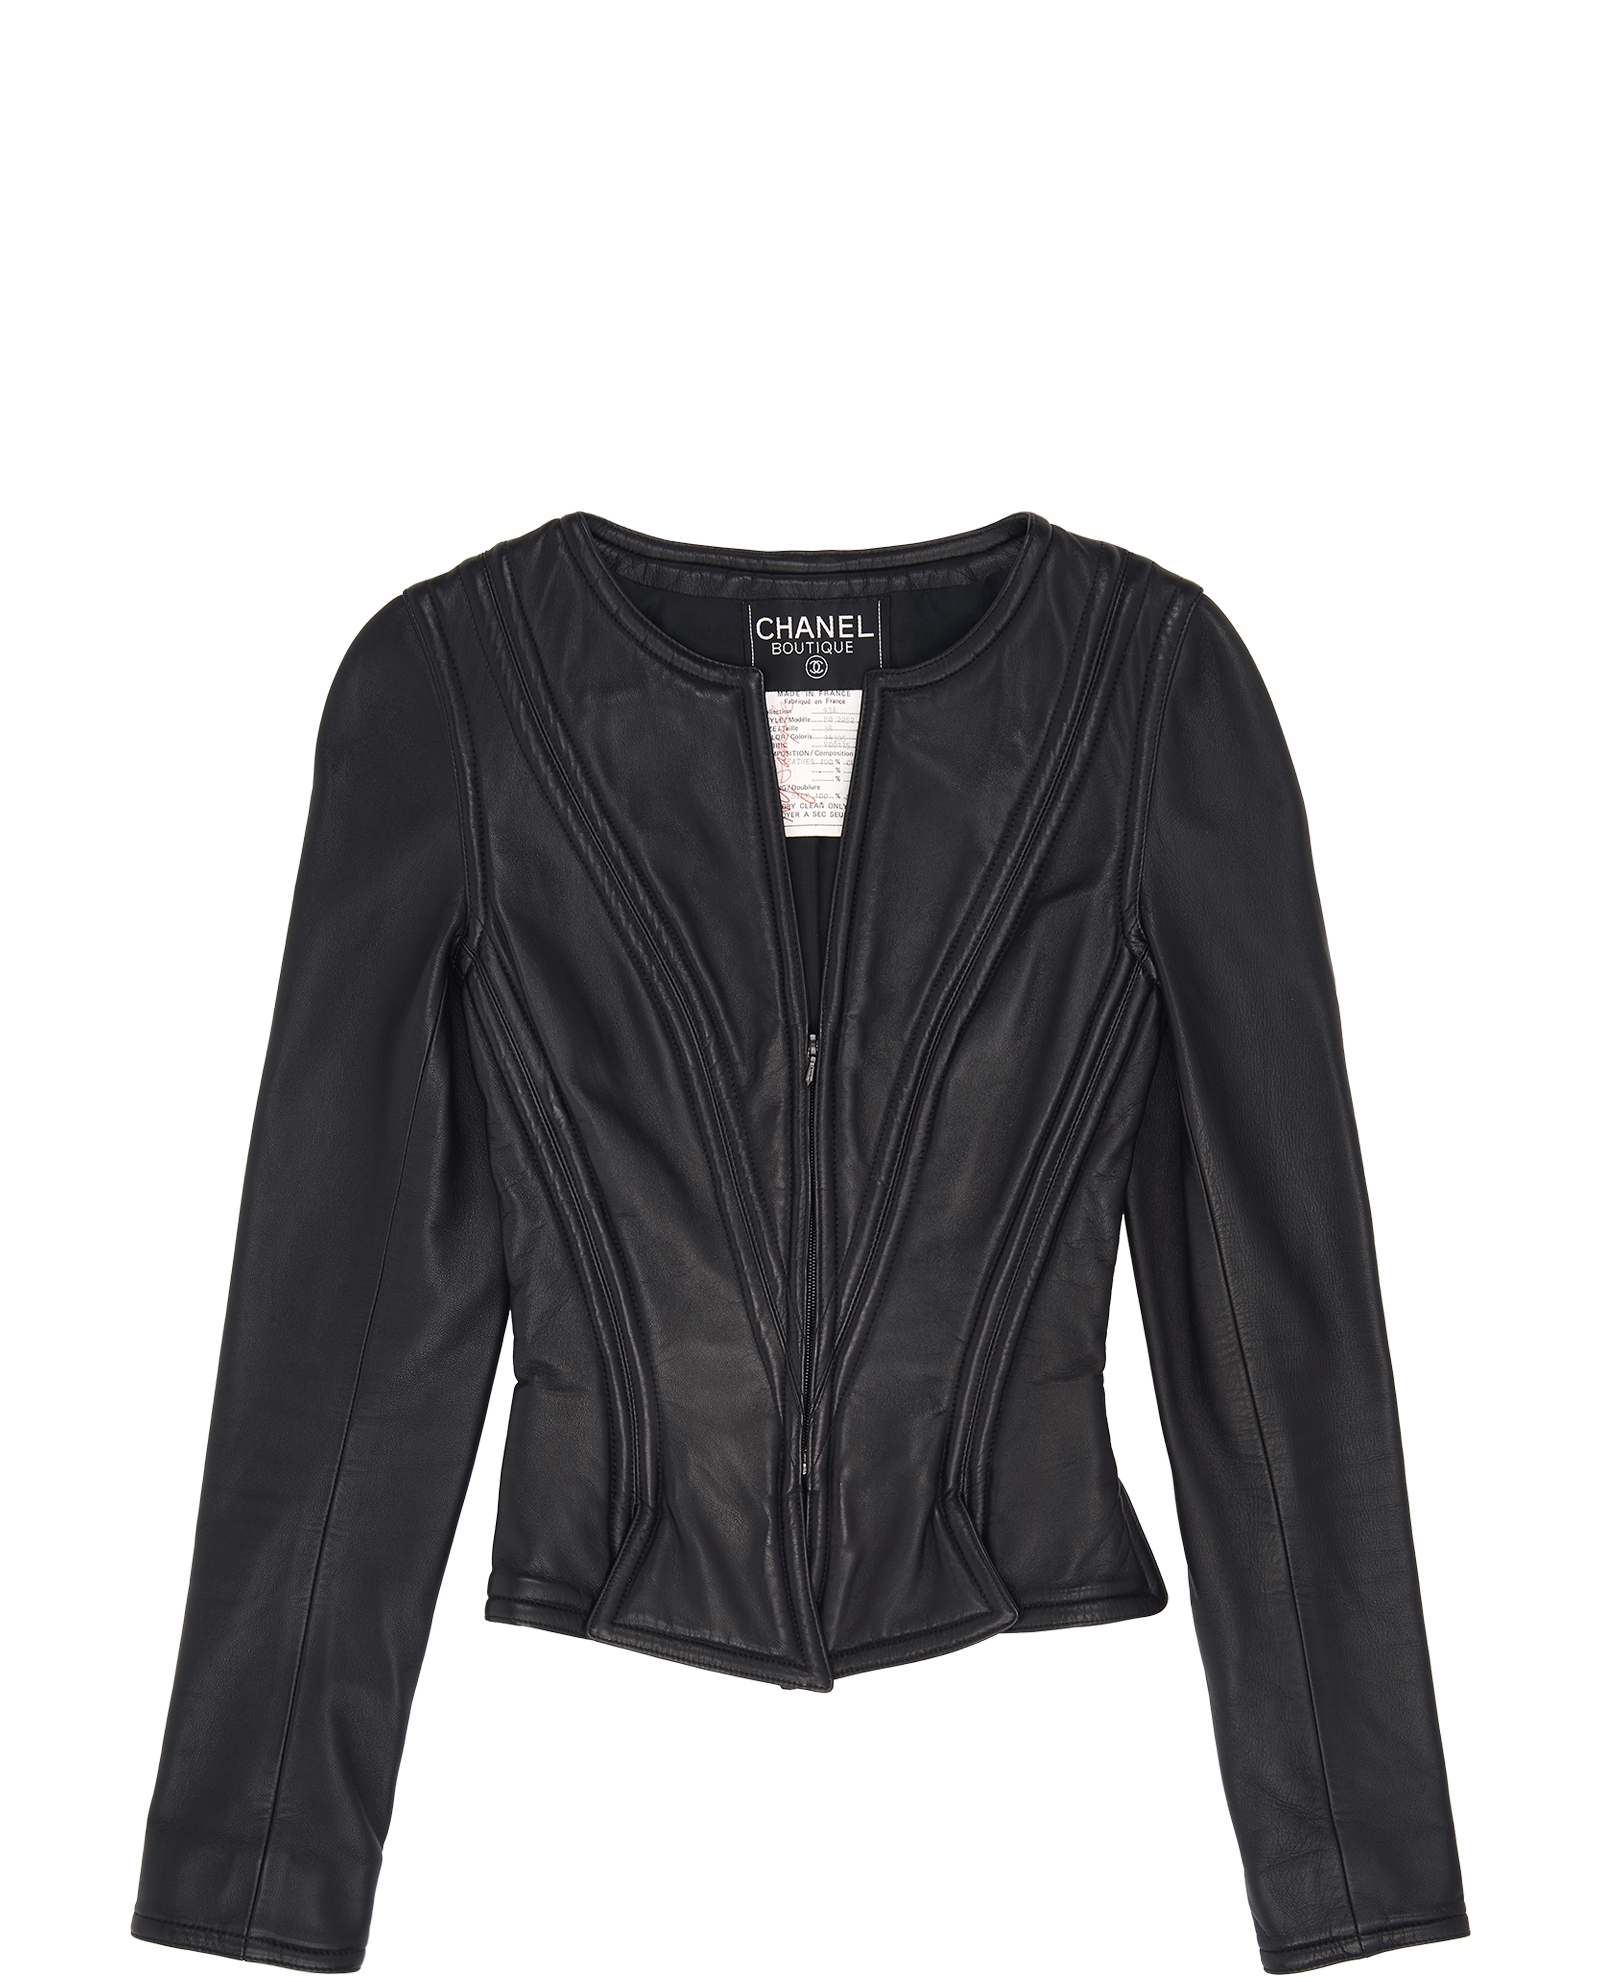 Chanel Vintage Structure Zipped Jacket